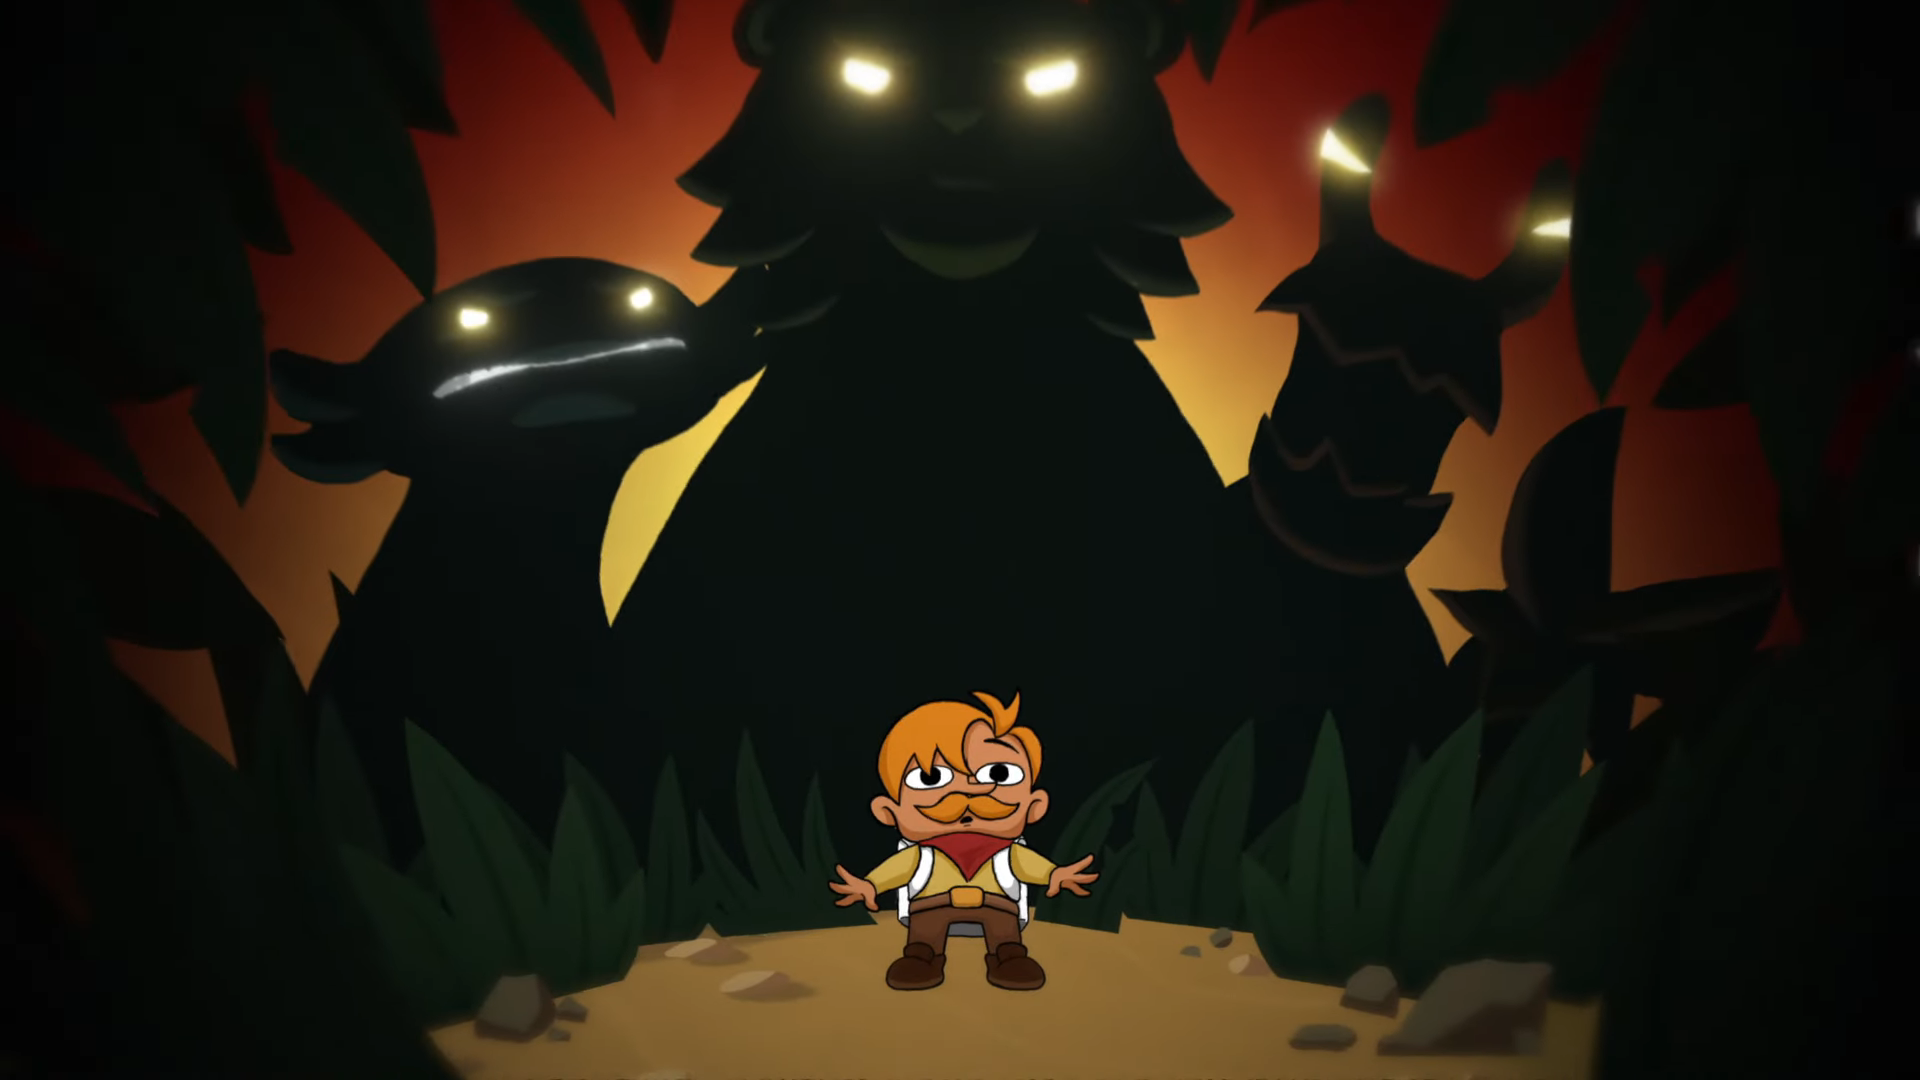 Explorer standing in front of three huge looming monsters shrouded in darkness in Patch Quest